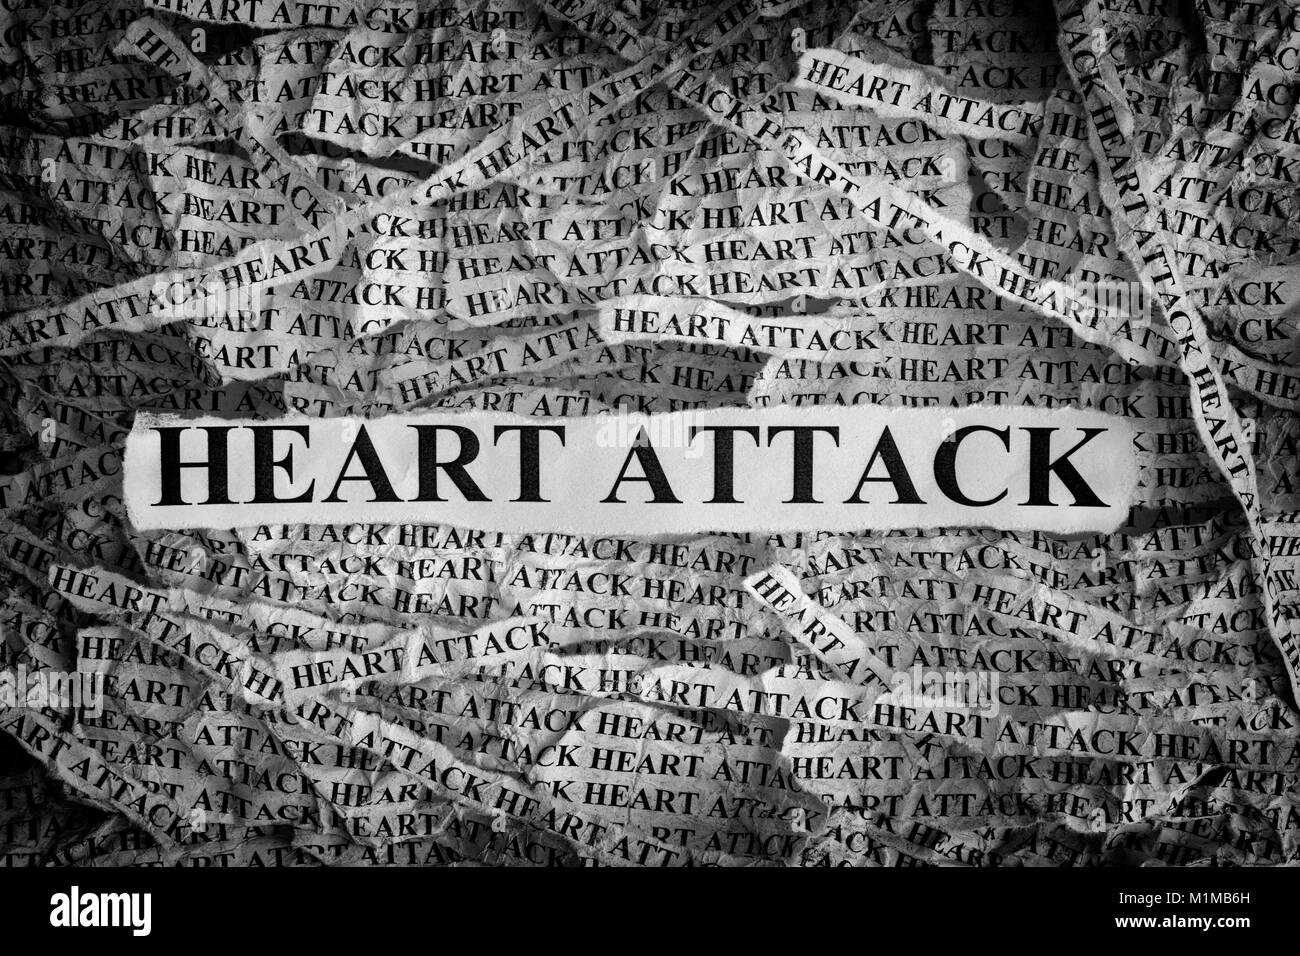 Heart Attack. Torn pieces of paper with the word Heart Attack. Concept Image. Black and White. Closeup. Stock Photo